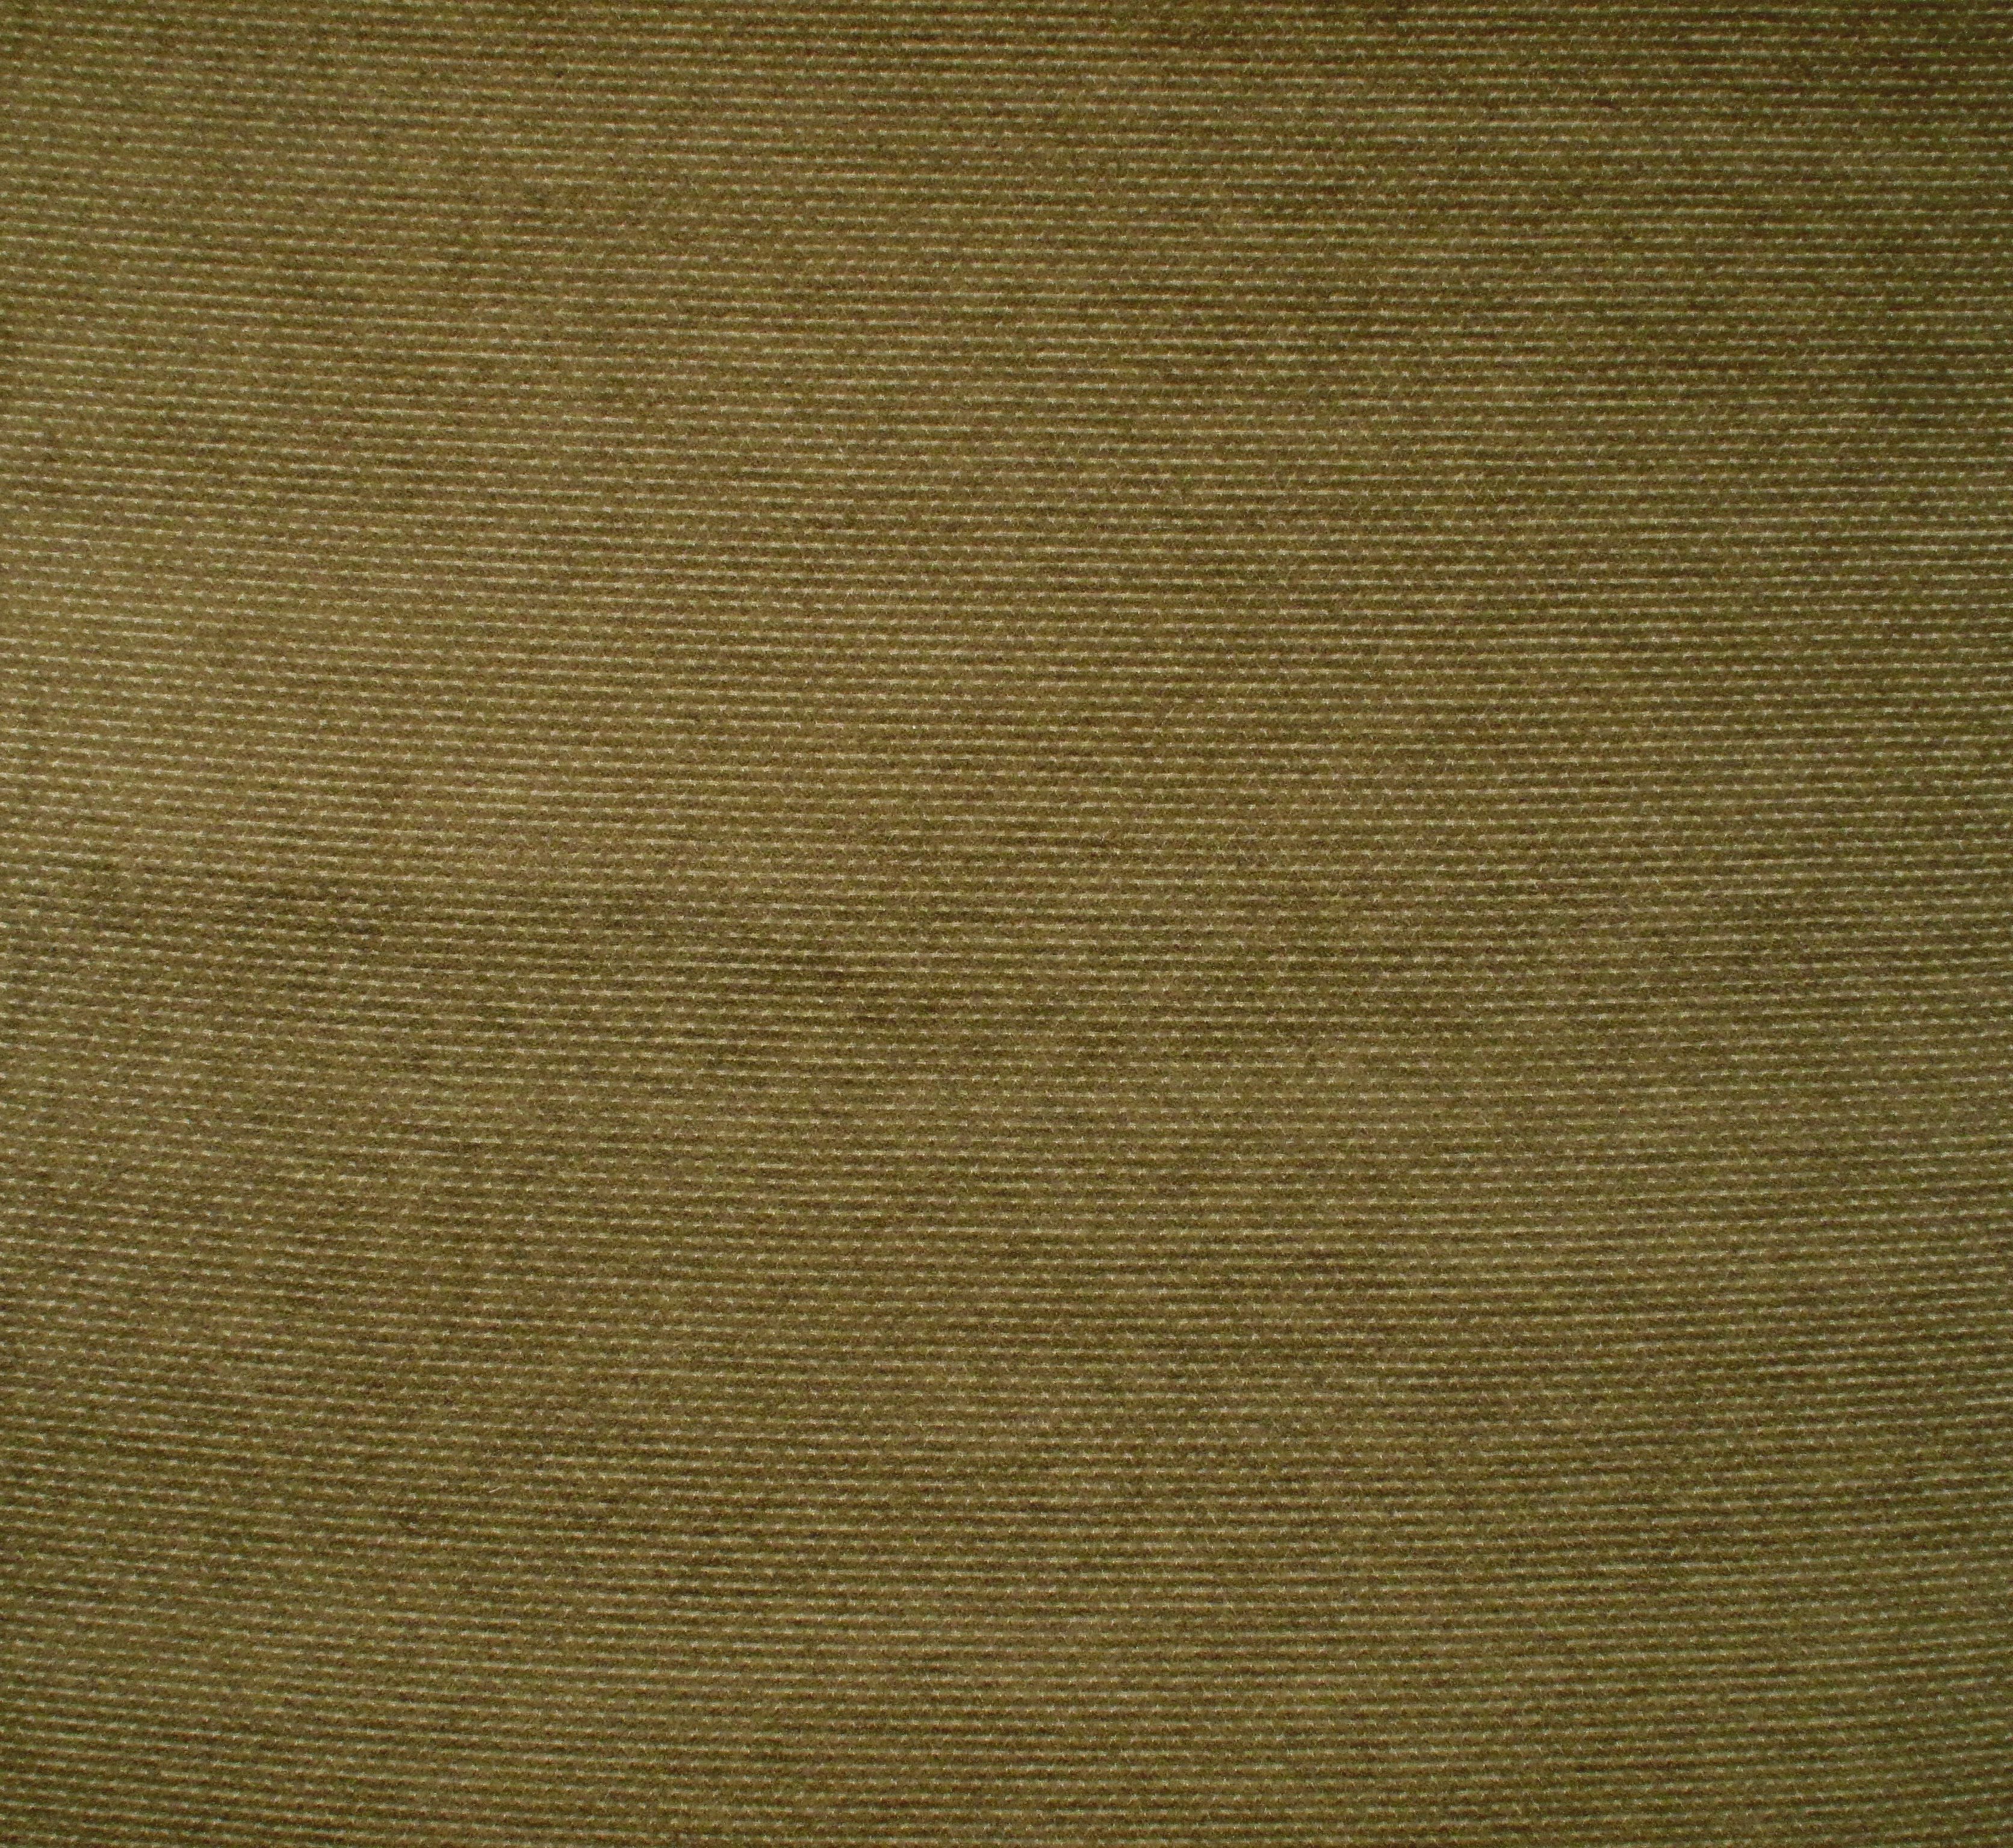 Yosemite fabric in burnish color - pattern number PW 00081460 - by Scalamandre in the Old World Weavers collection